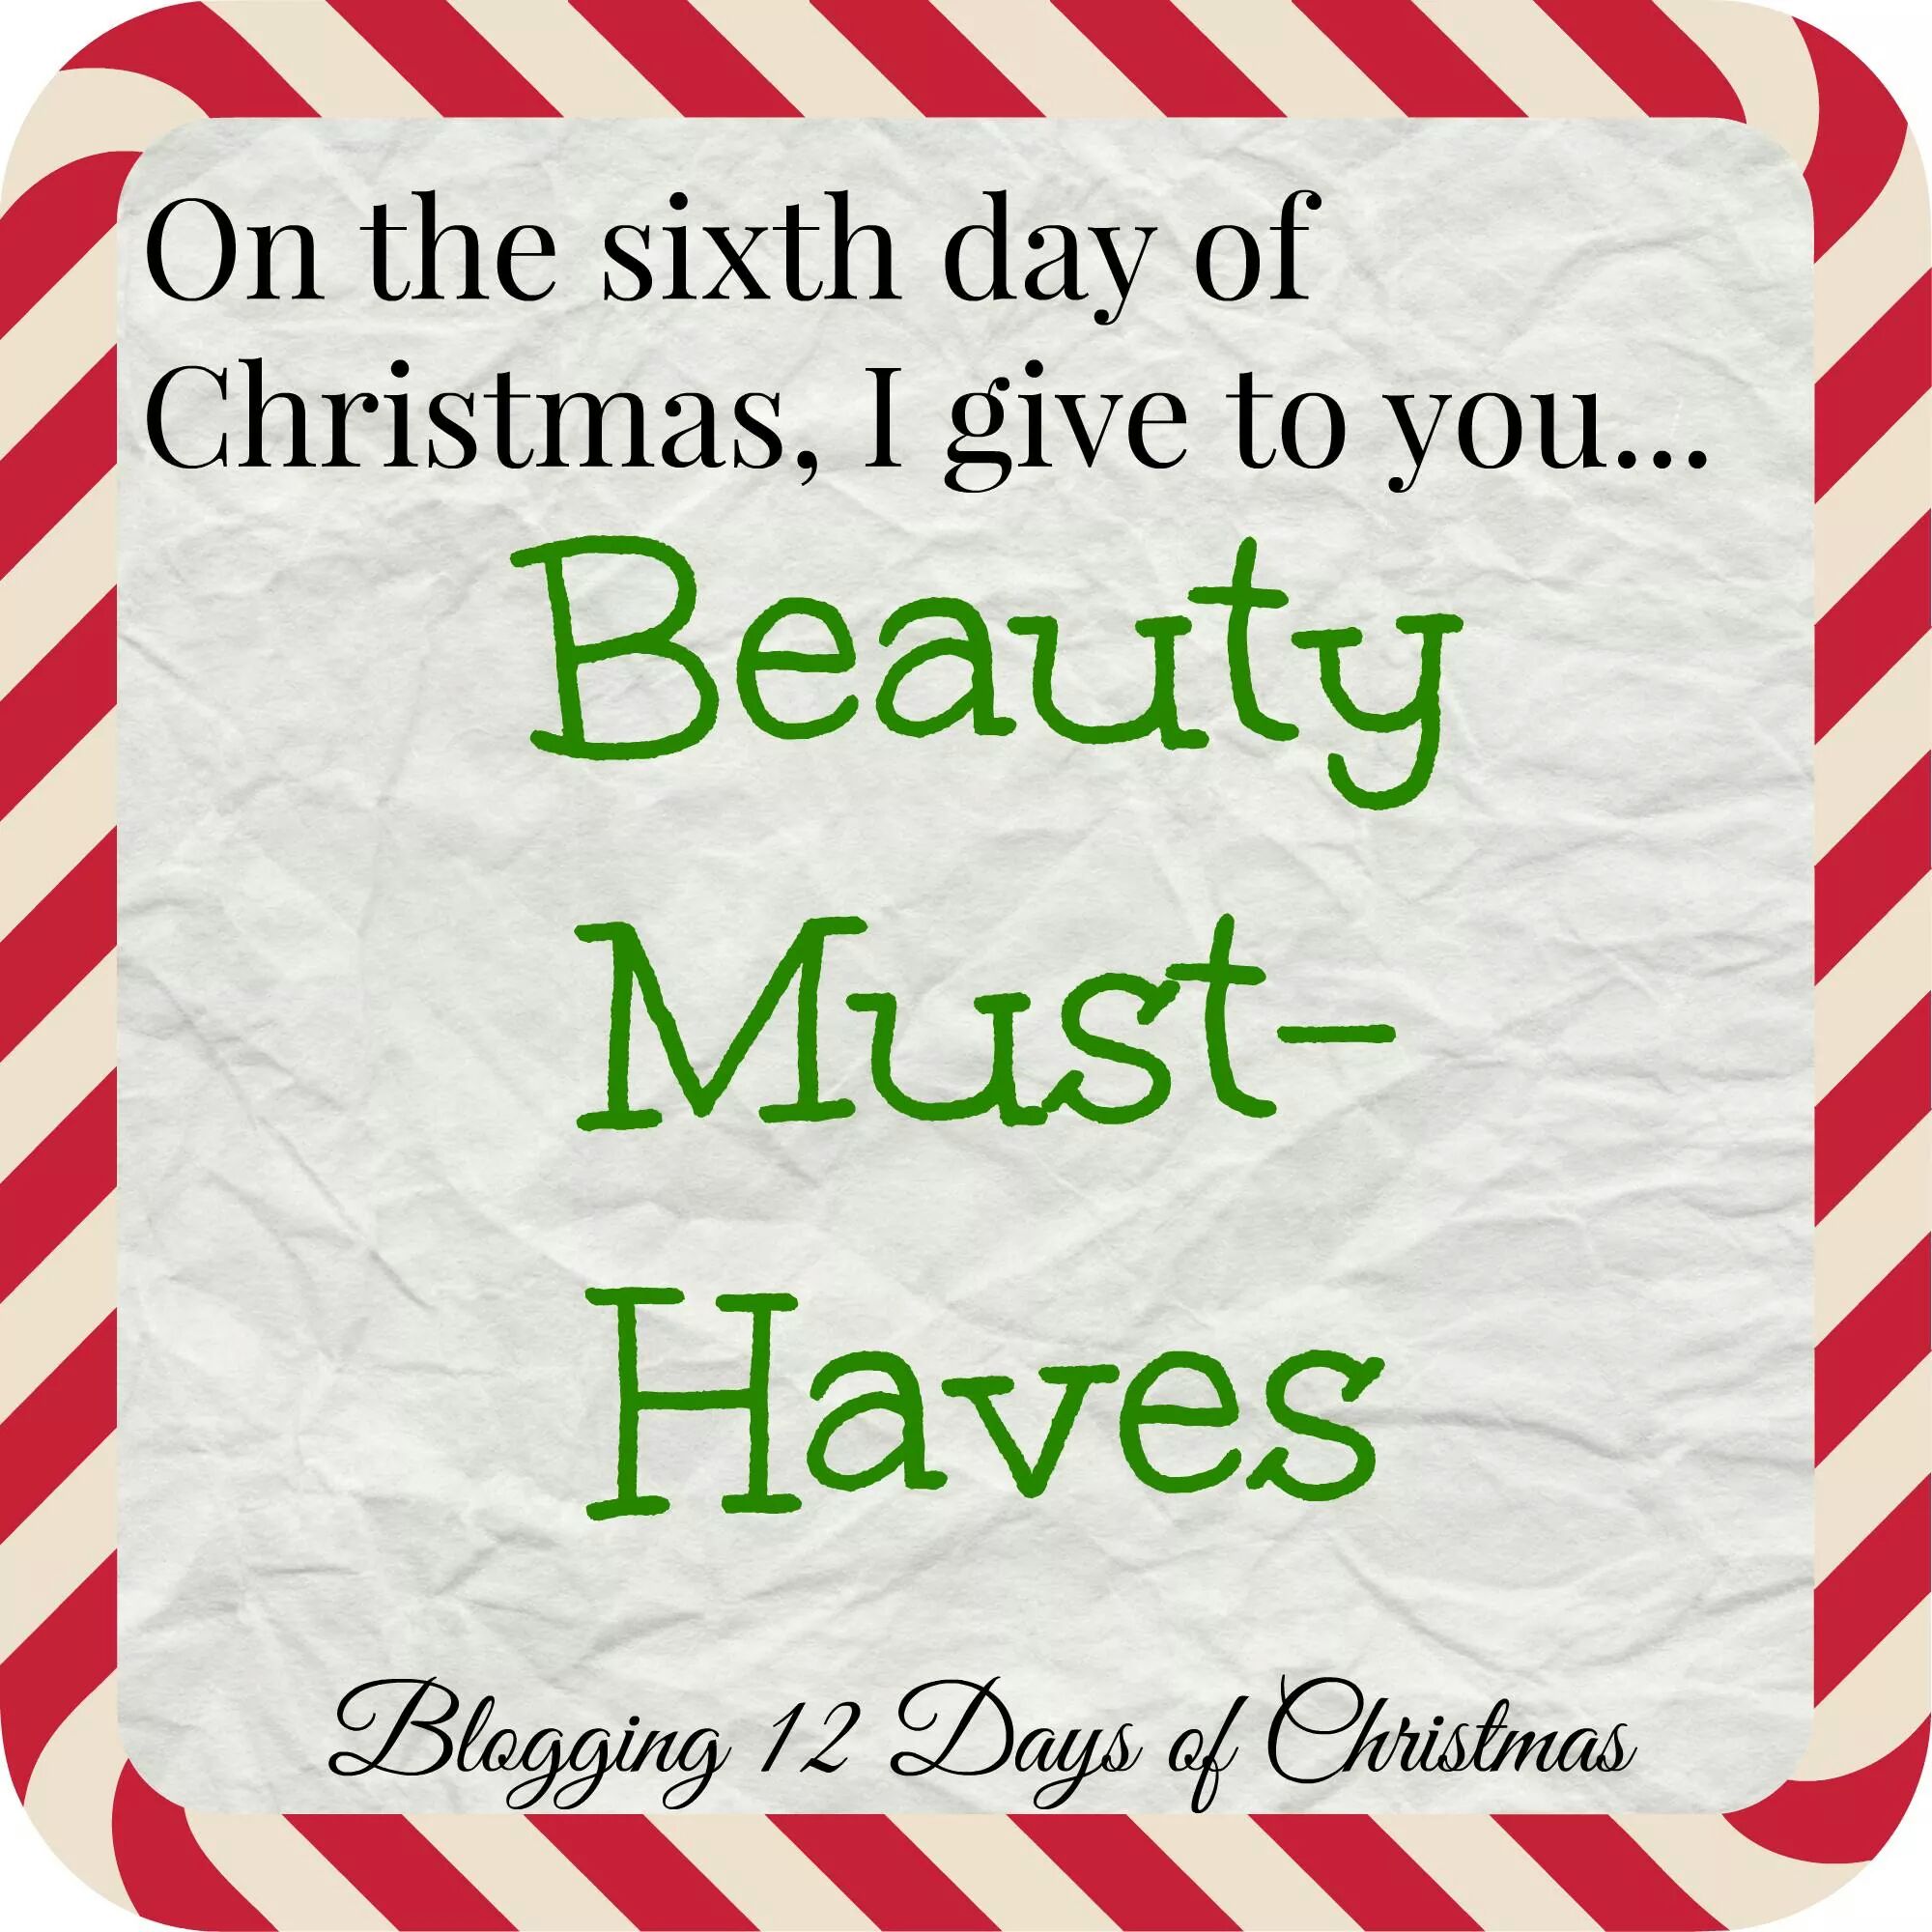 Day 6 of Blogging Christmas